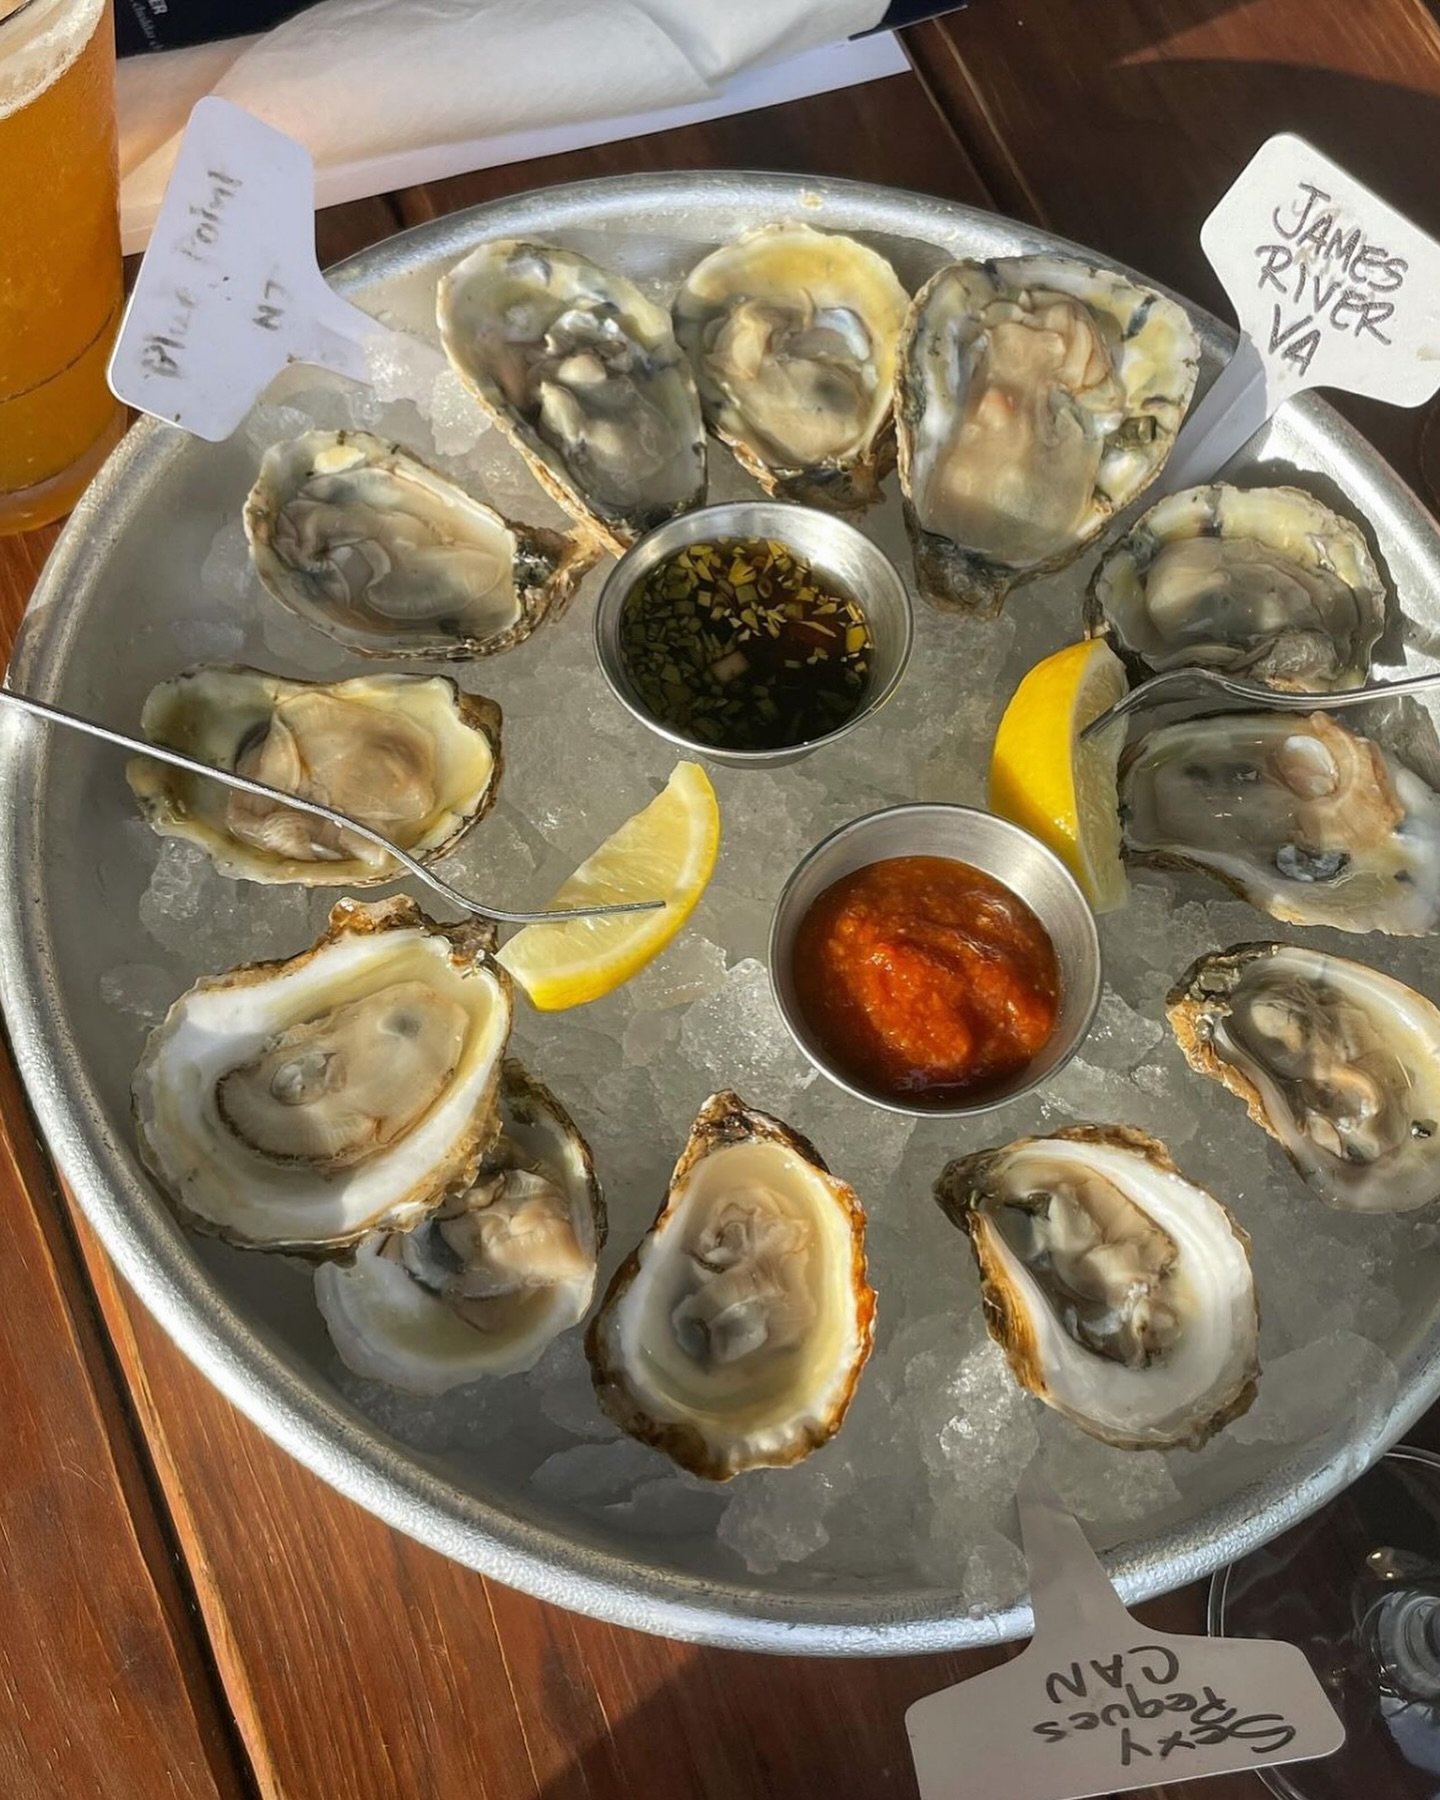 Celebrate Mother's Day at The Tides with $1 oysters all day long this Sunday, May 12th! 🍾🦪 

&amp; check out our last post for weekend specials ✨ 

📸 @karenellenn 

#TheTidesMarker #SafetyHarbor #TampaEats #SeafoodRestaurant